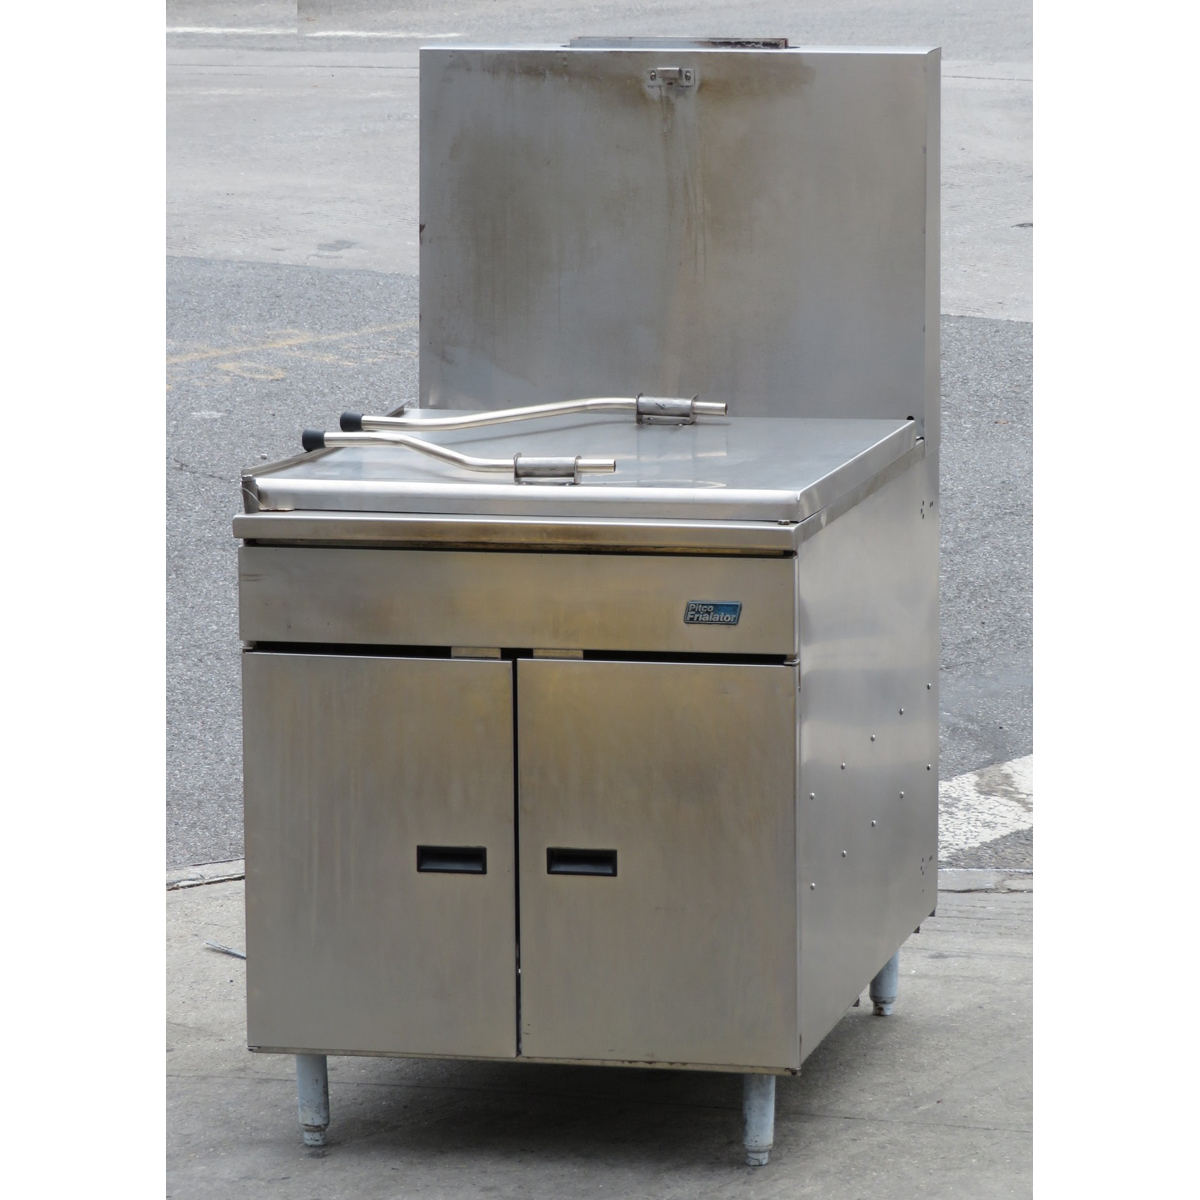 Pitco 24P Natural Gas Donut Fryer, Used Great Condition image 2